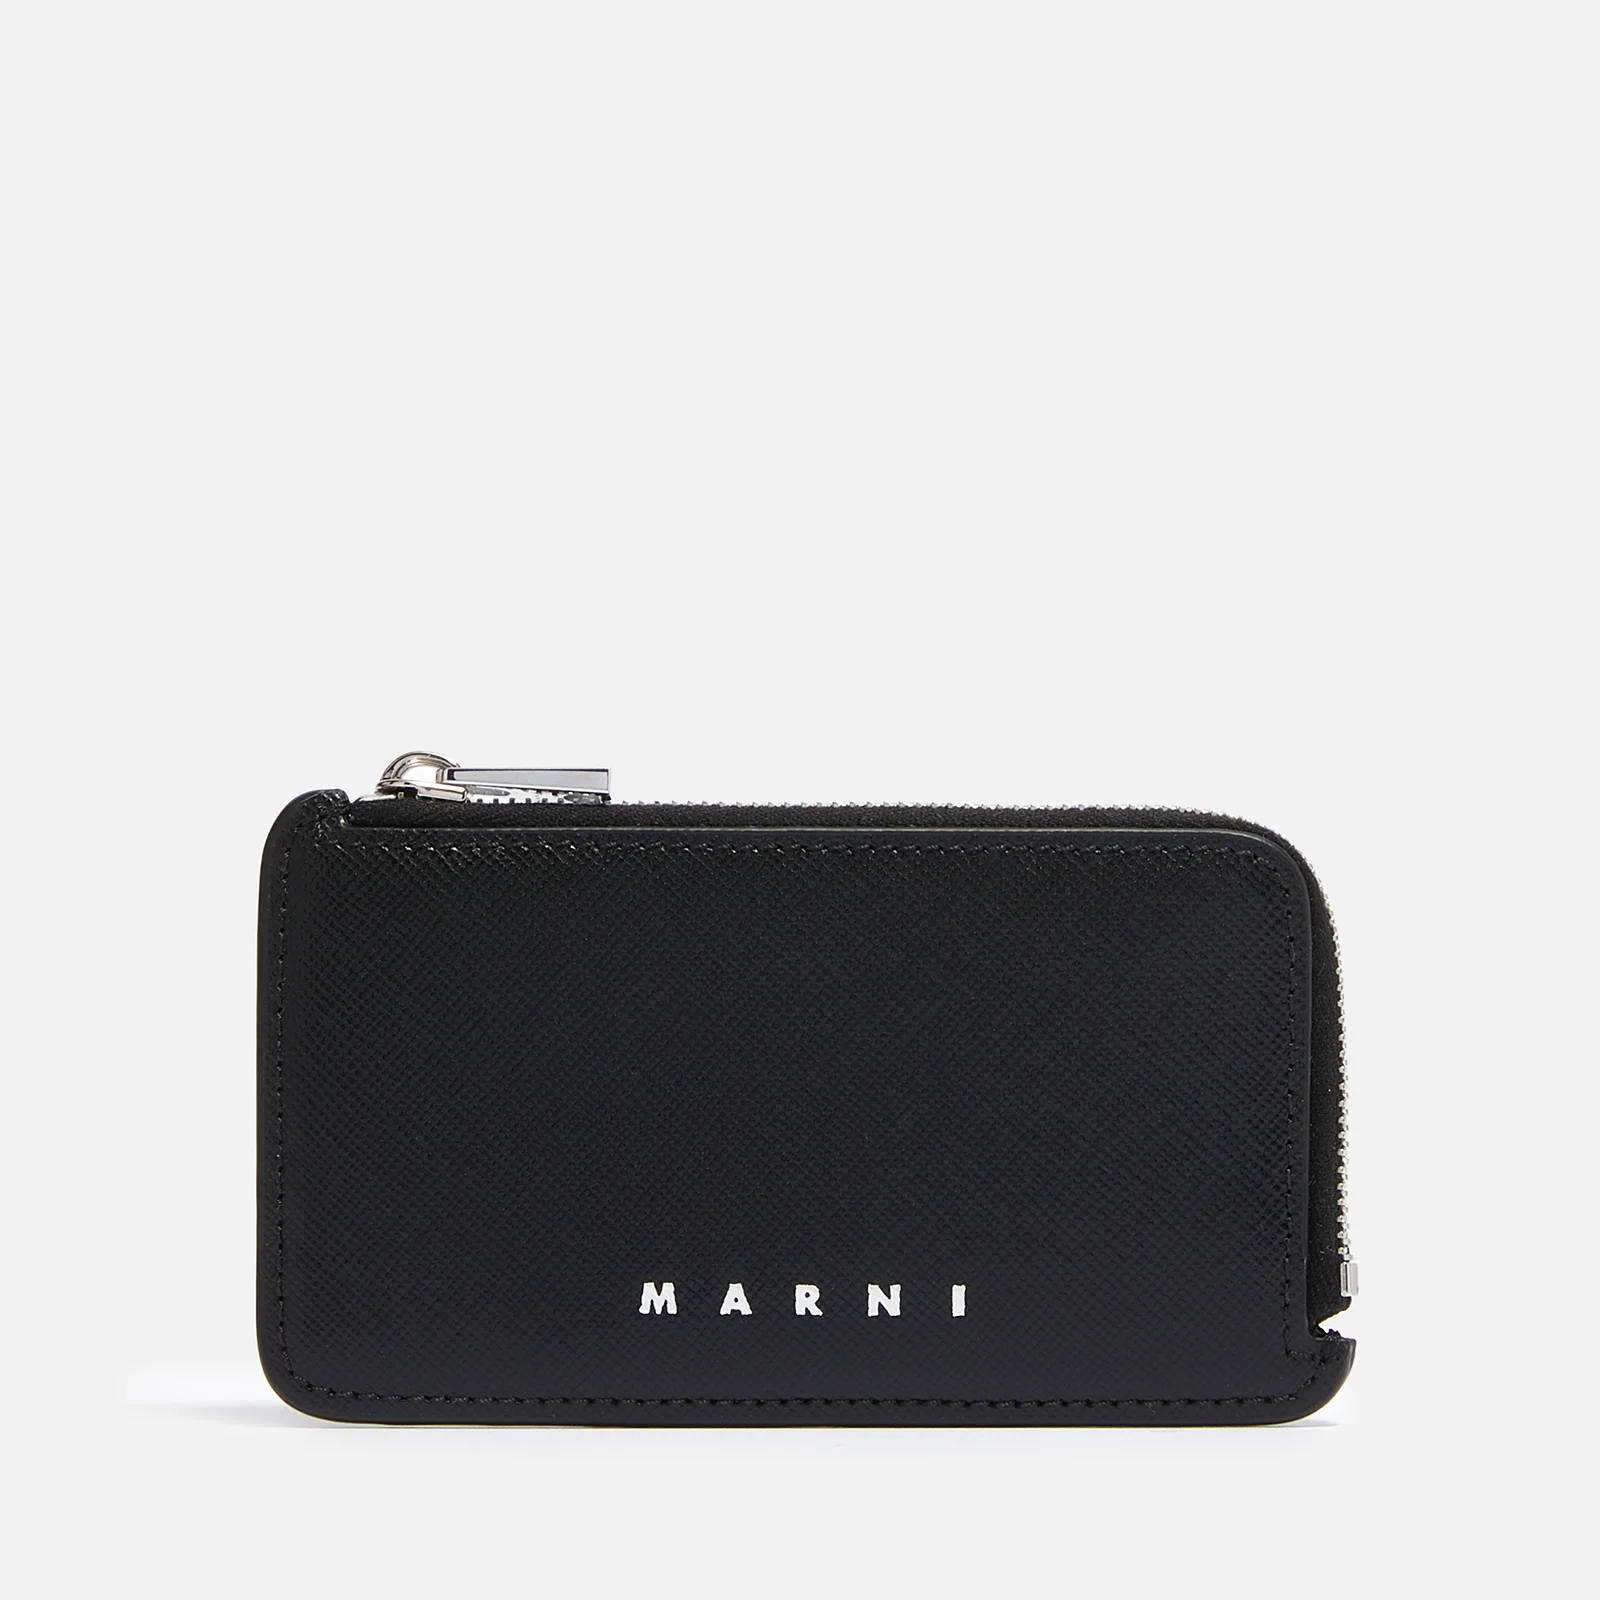 Marni Logo-Printed Leather Coin and Card Holder Image 1